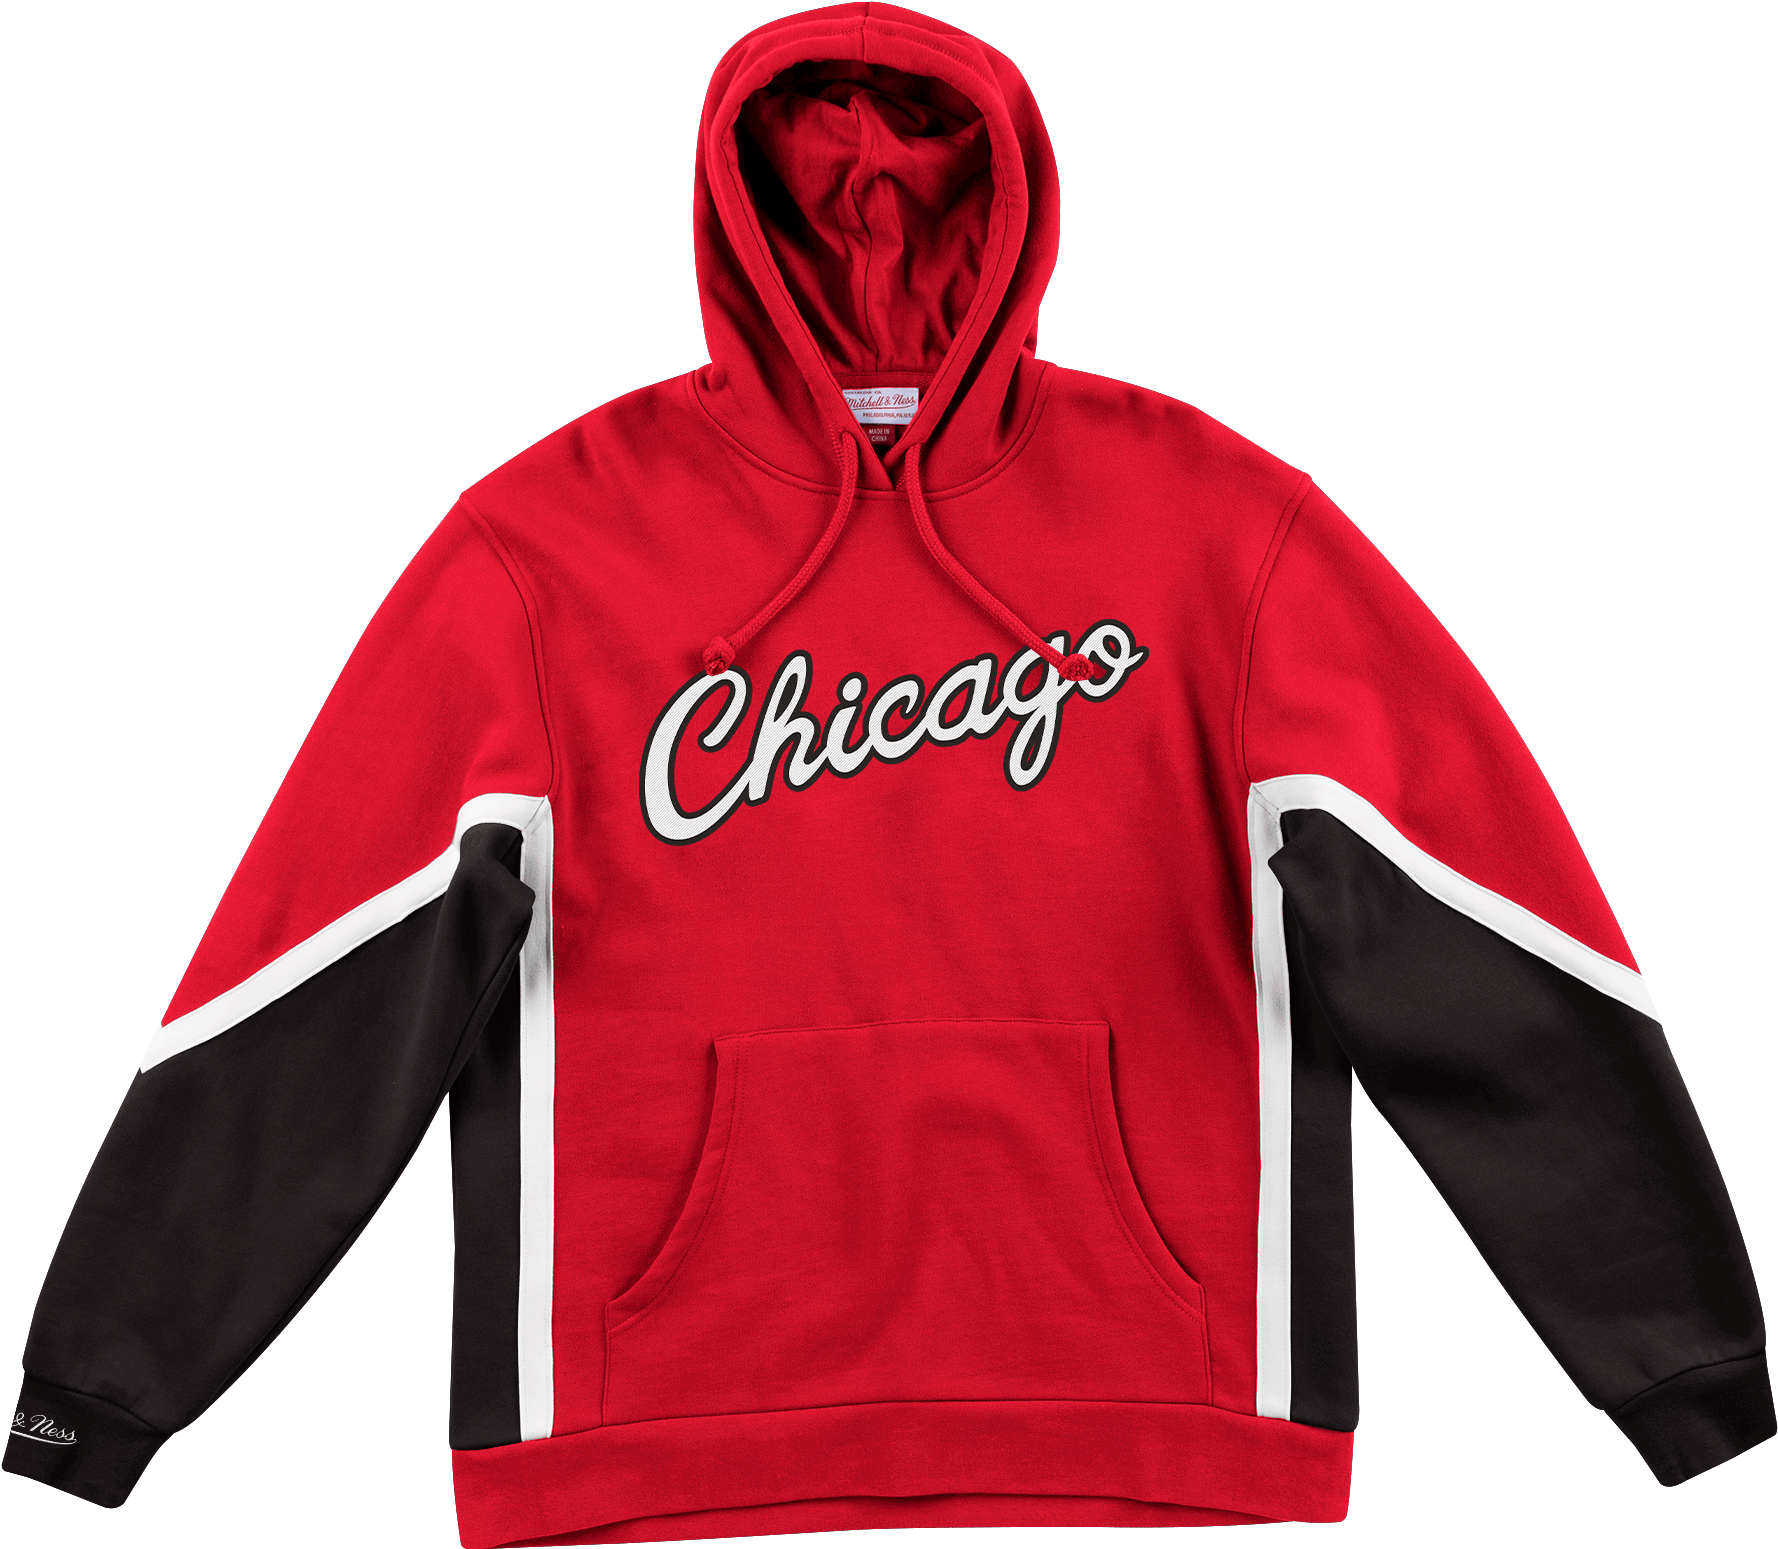 A Red And Black Hoodie With White Text